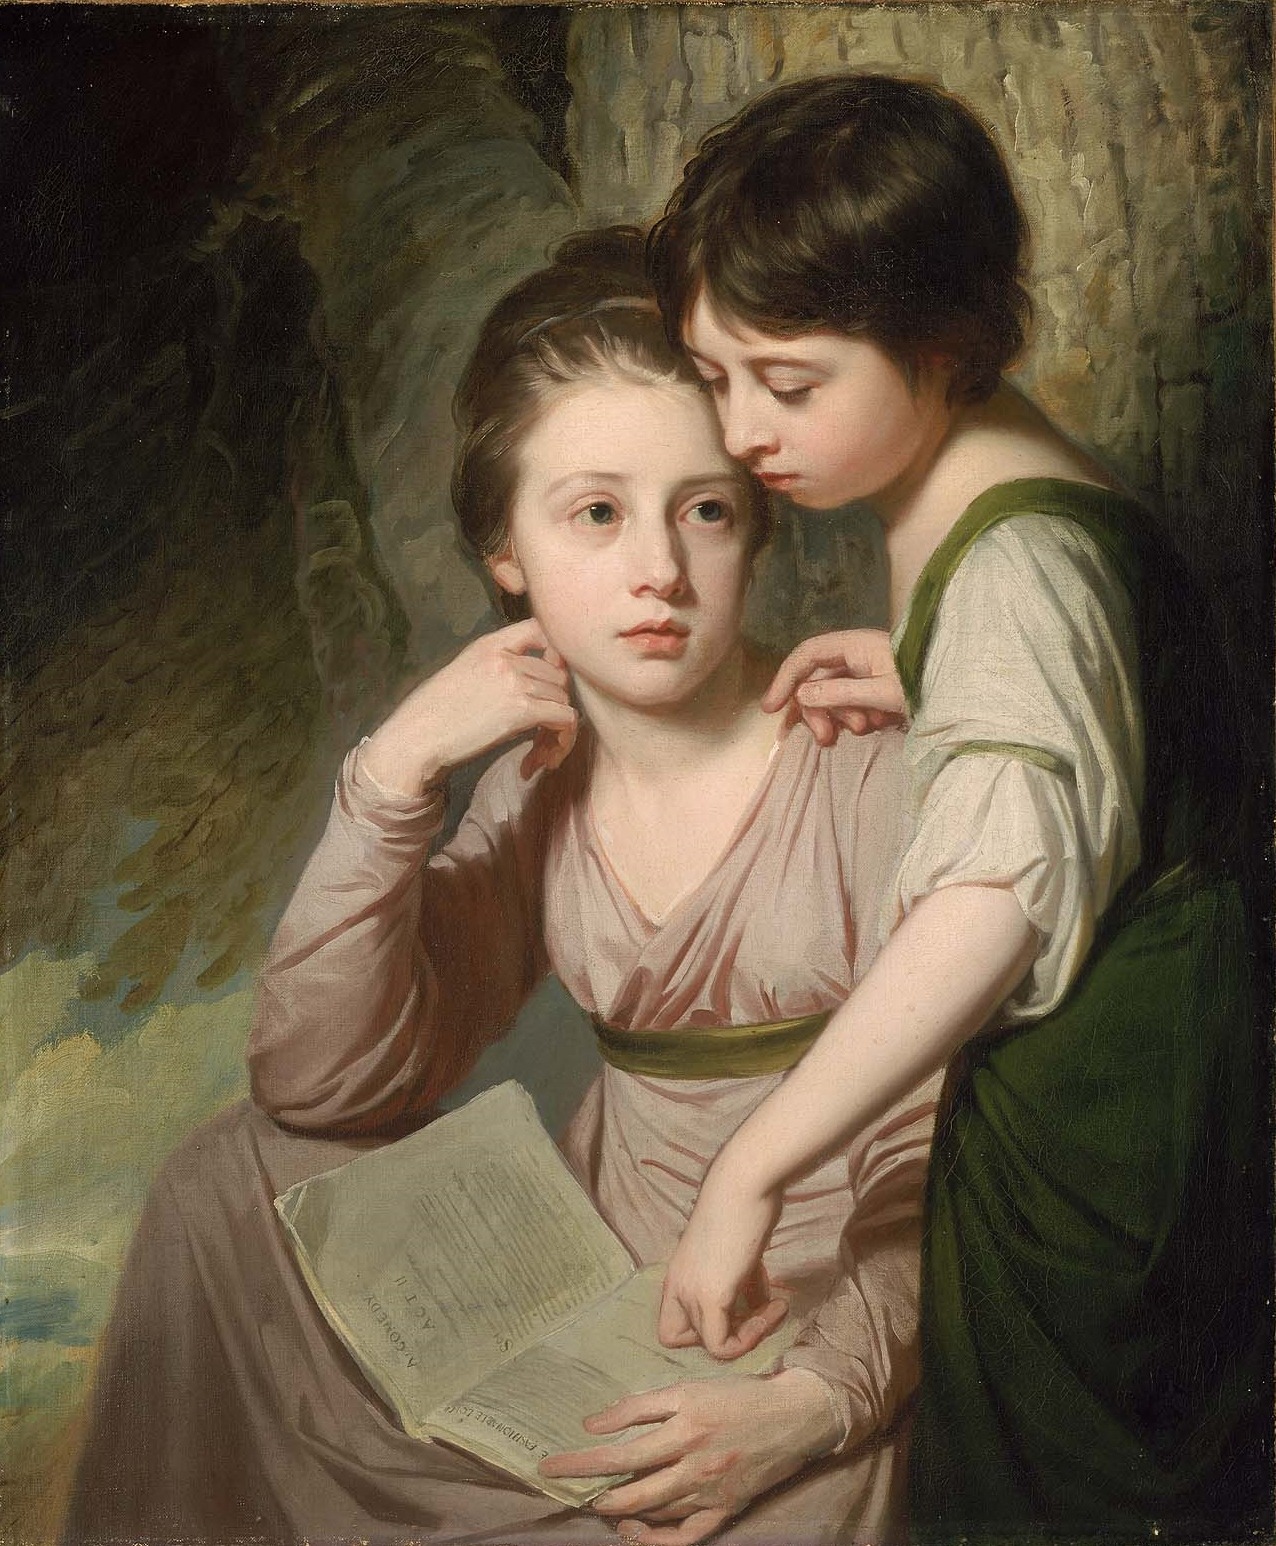 Portrait of Two Girls (Misses Cumberland) (c.1772-73). George Romney (English, 1734-1802). Oil on canvas. MFA, Boston.
Richard Cumberland’s daughters read his latest play, The Fashionable Lover. Romney constructs an affectionate and subtle narrative...